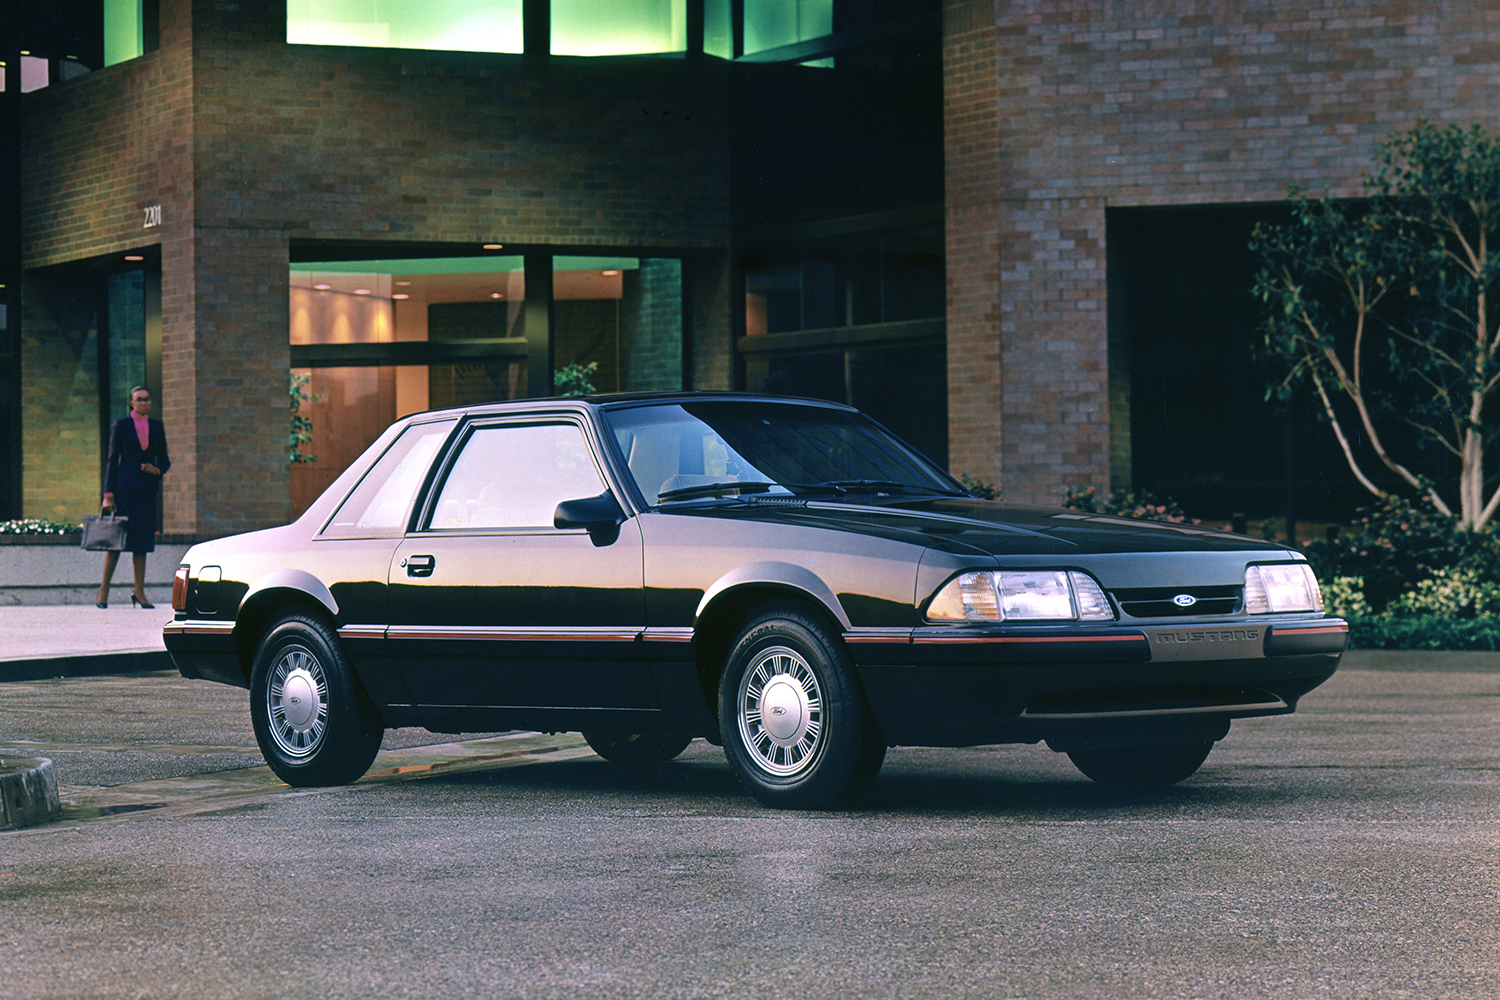 A 1988 Ford Mustang LX with a woman standing in the background. The 5.0 Mustang is now considered a modern classic car.